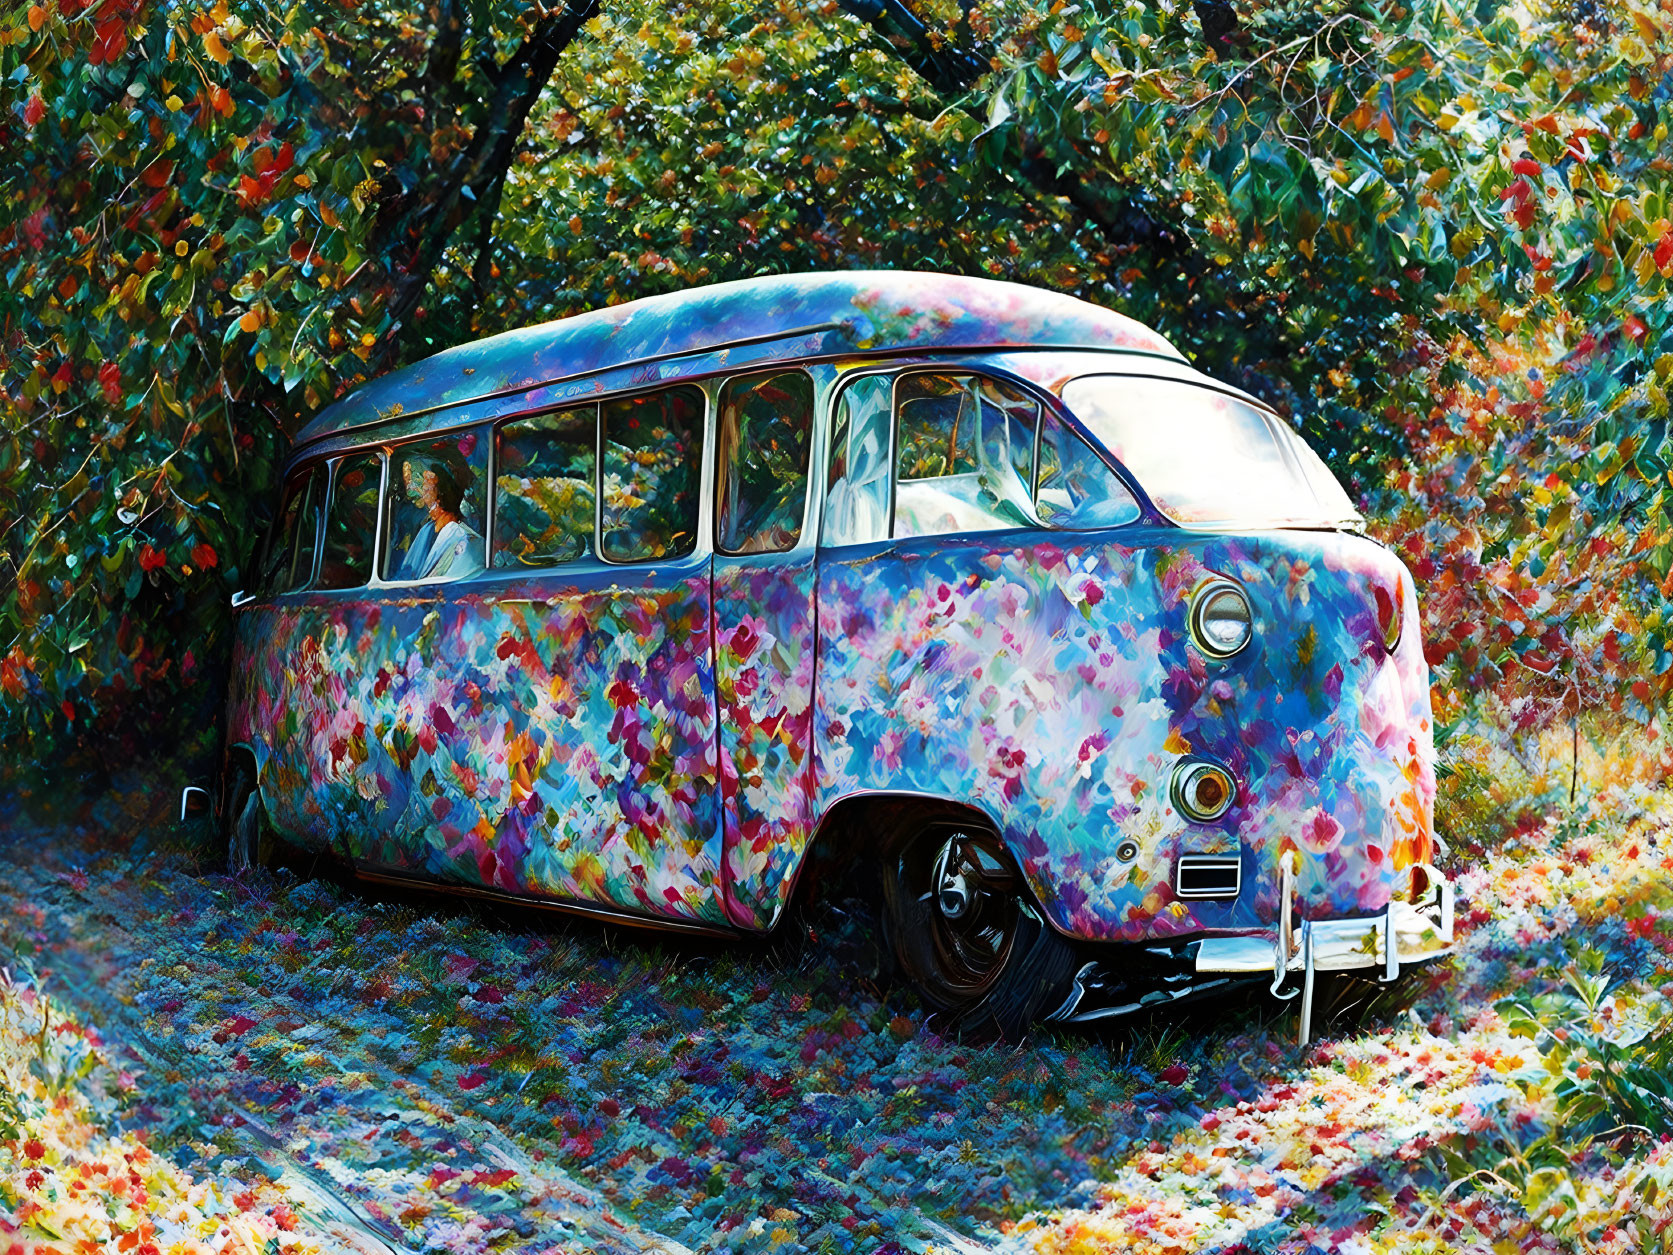 Vintage Bus with Floral Design in Autumn Forest